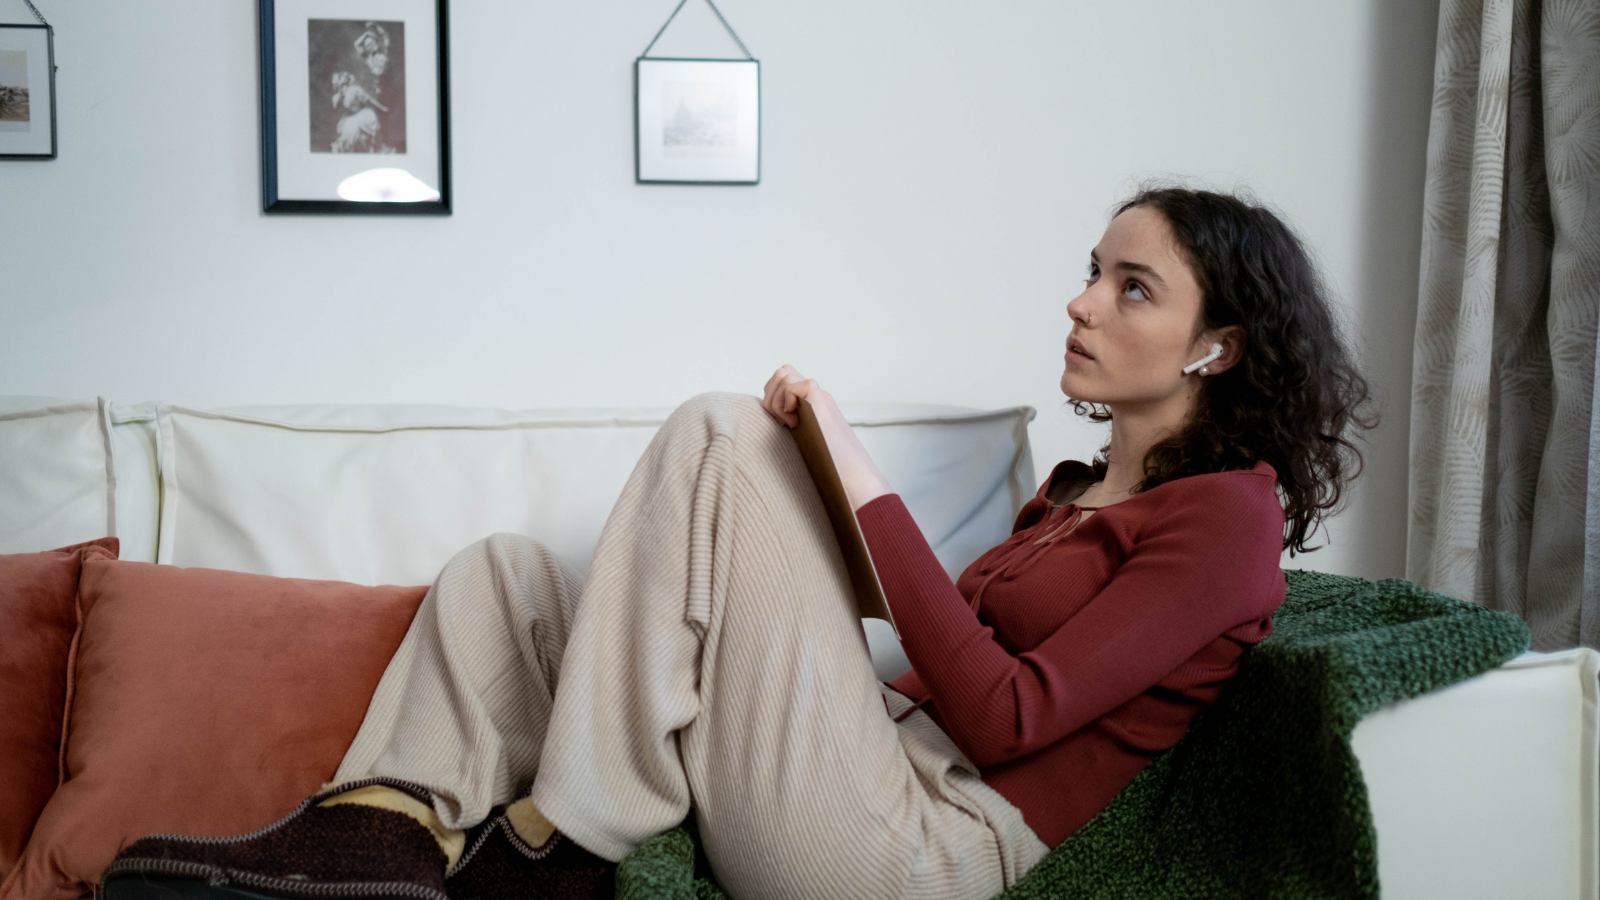 Woman sitting on a couch looking unsettled